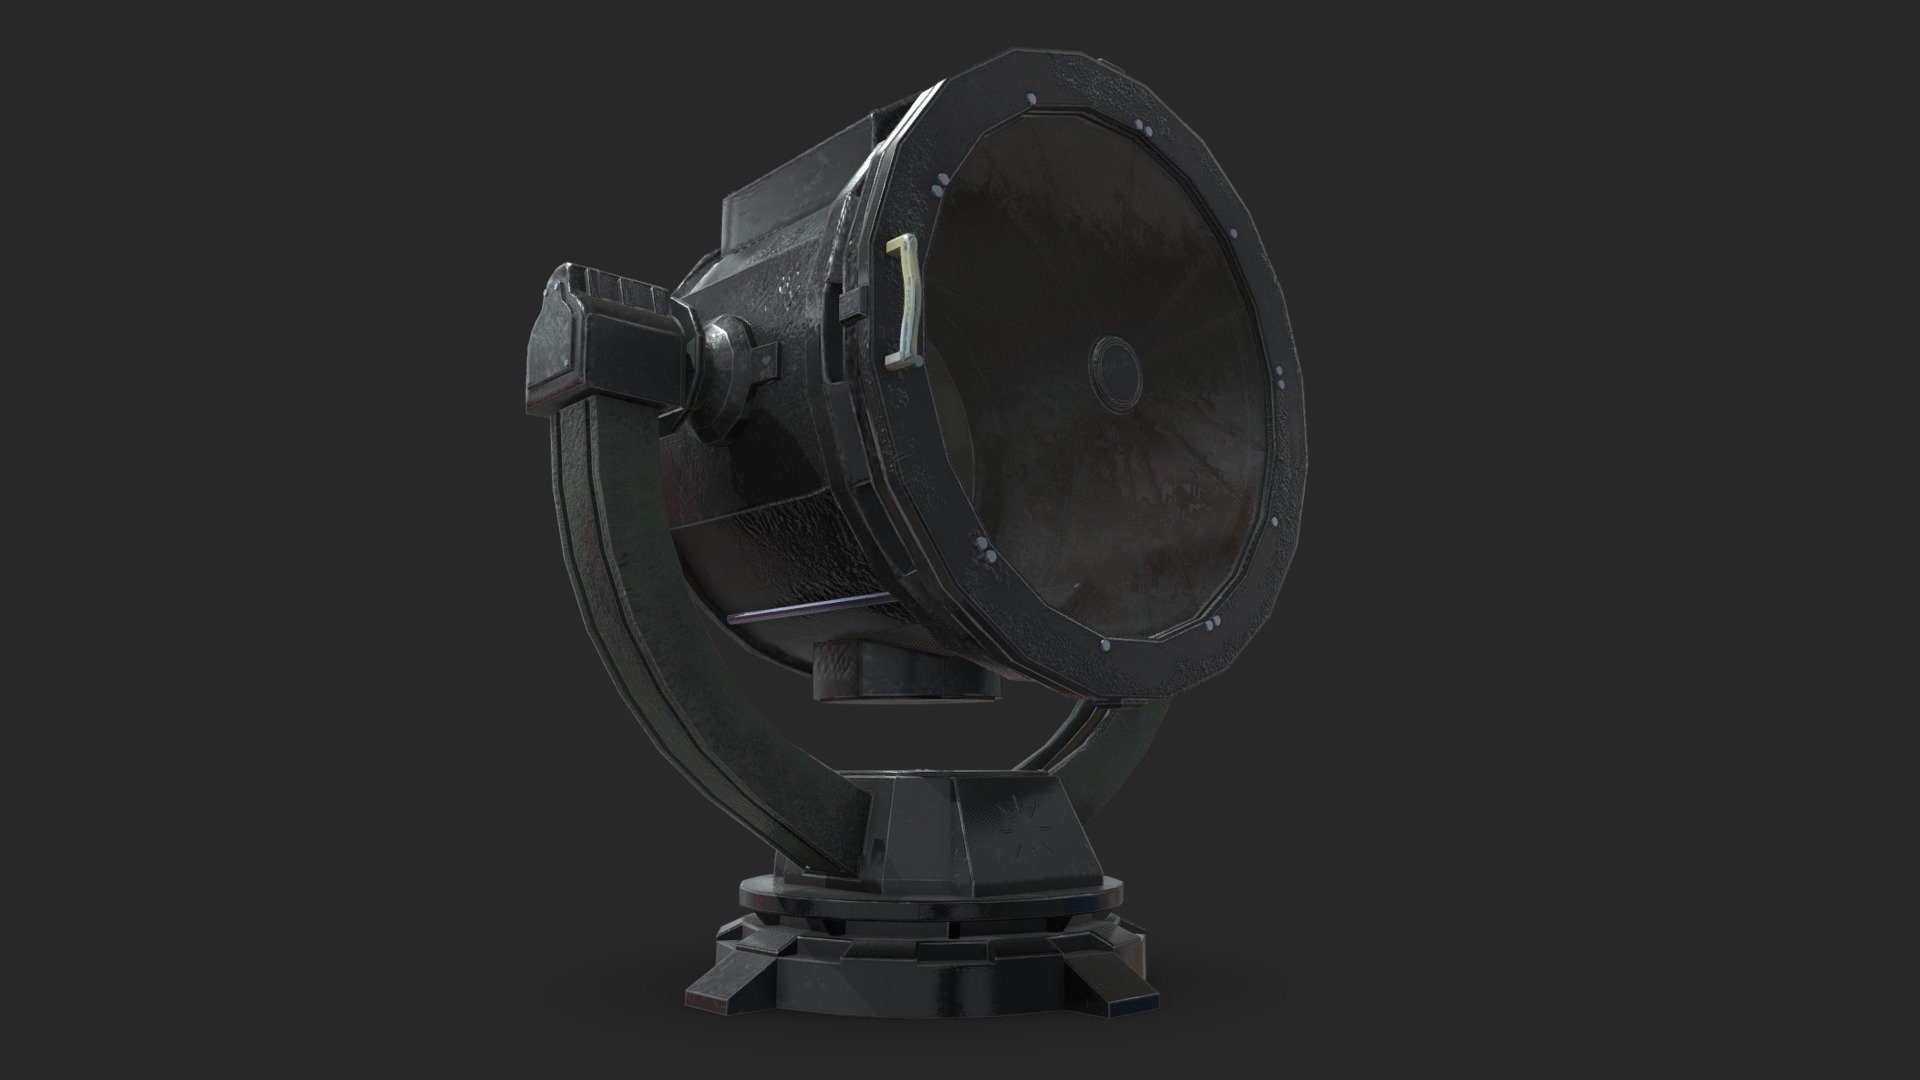 Rendered Searchlight design, loosly based from WW2 era searchhlight Imagery. I used a workflow of Autodesk Maya to Substance Painter to complete this piece, allowing me to re-evaluate my skillset for future applications along with a greater understanding of material manufacturing. The final design will be rendered within an external engine 3d model